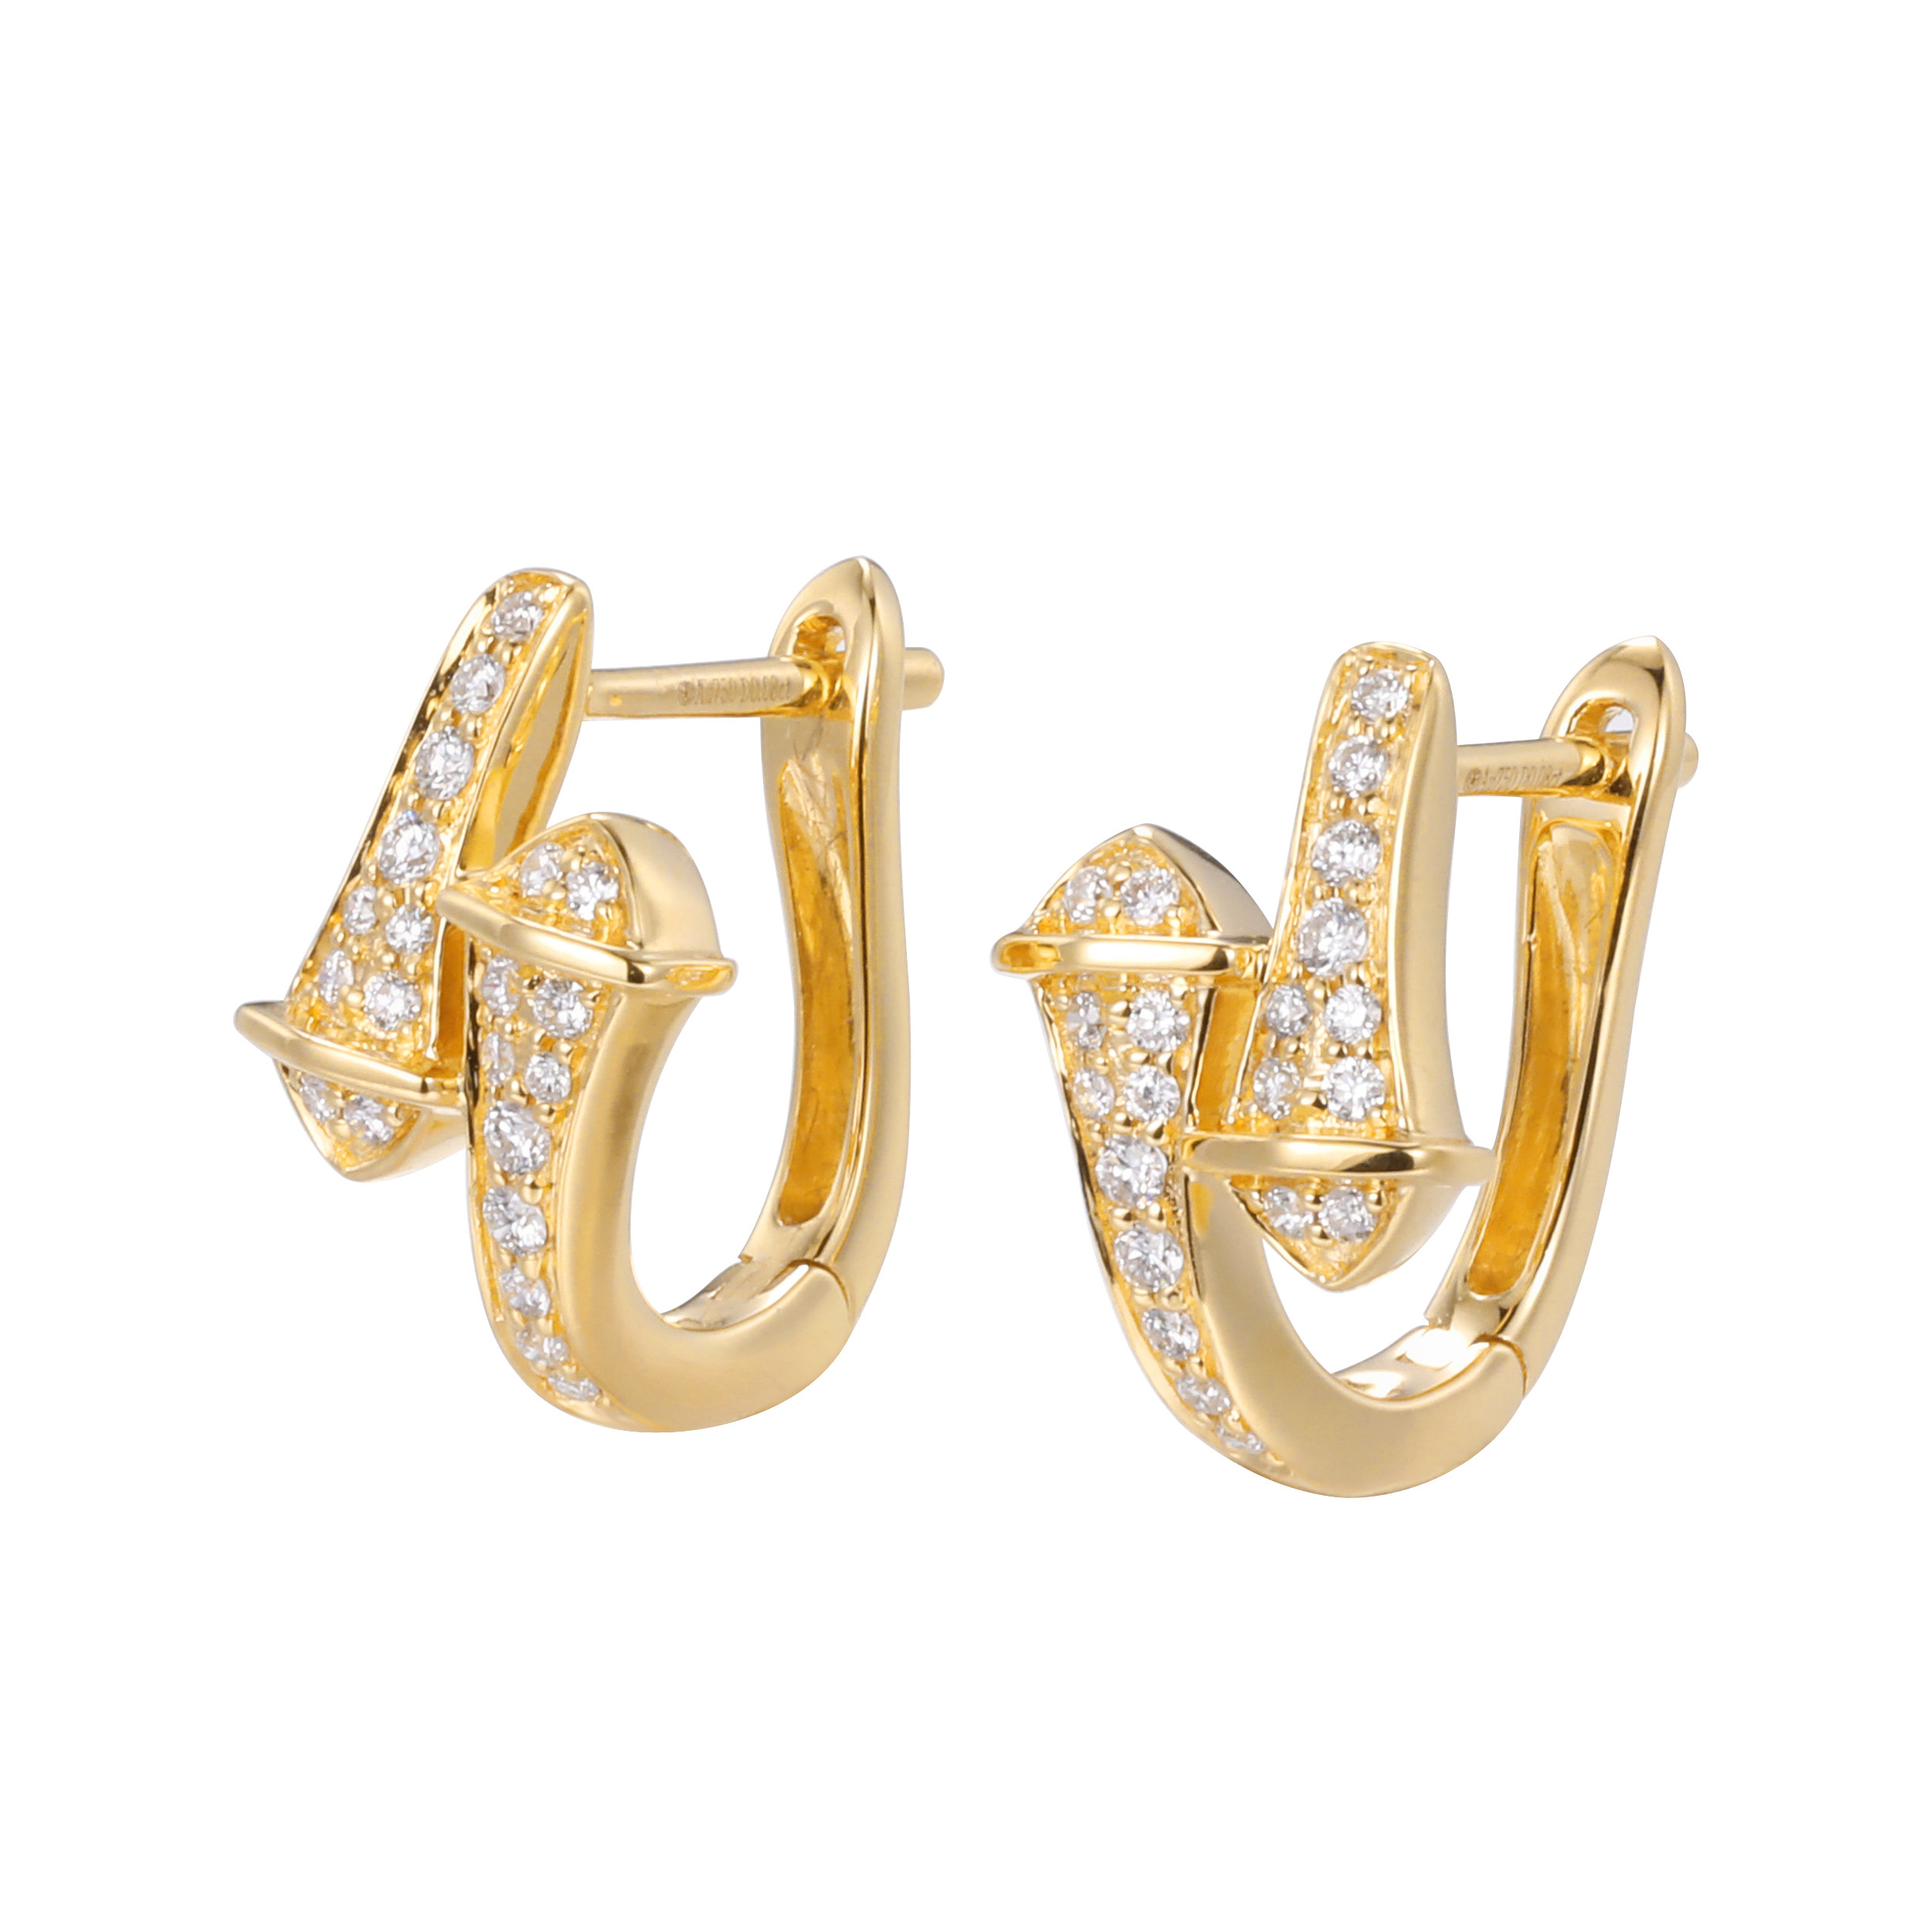 Wholesale Meaningful Love 18K Gold Diamond Earrings 2.4g Three-Color Optional Souvenir from china suppliers